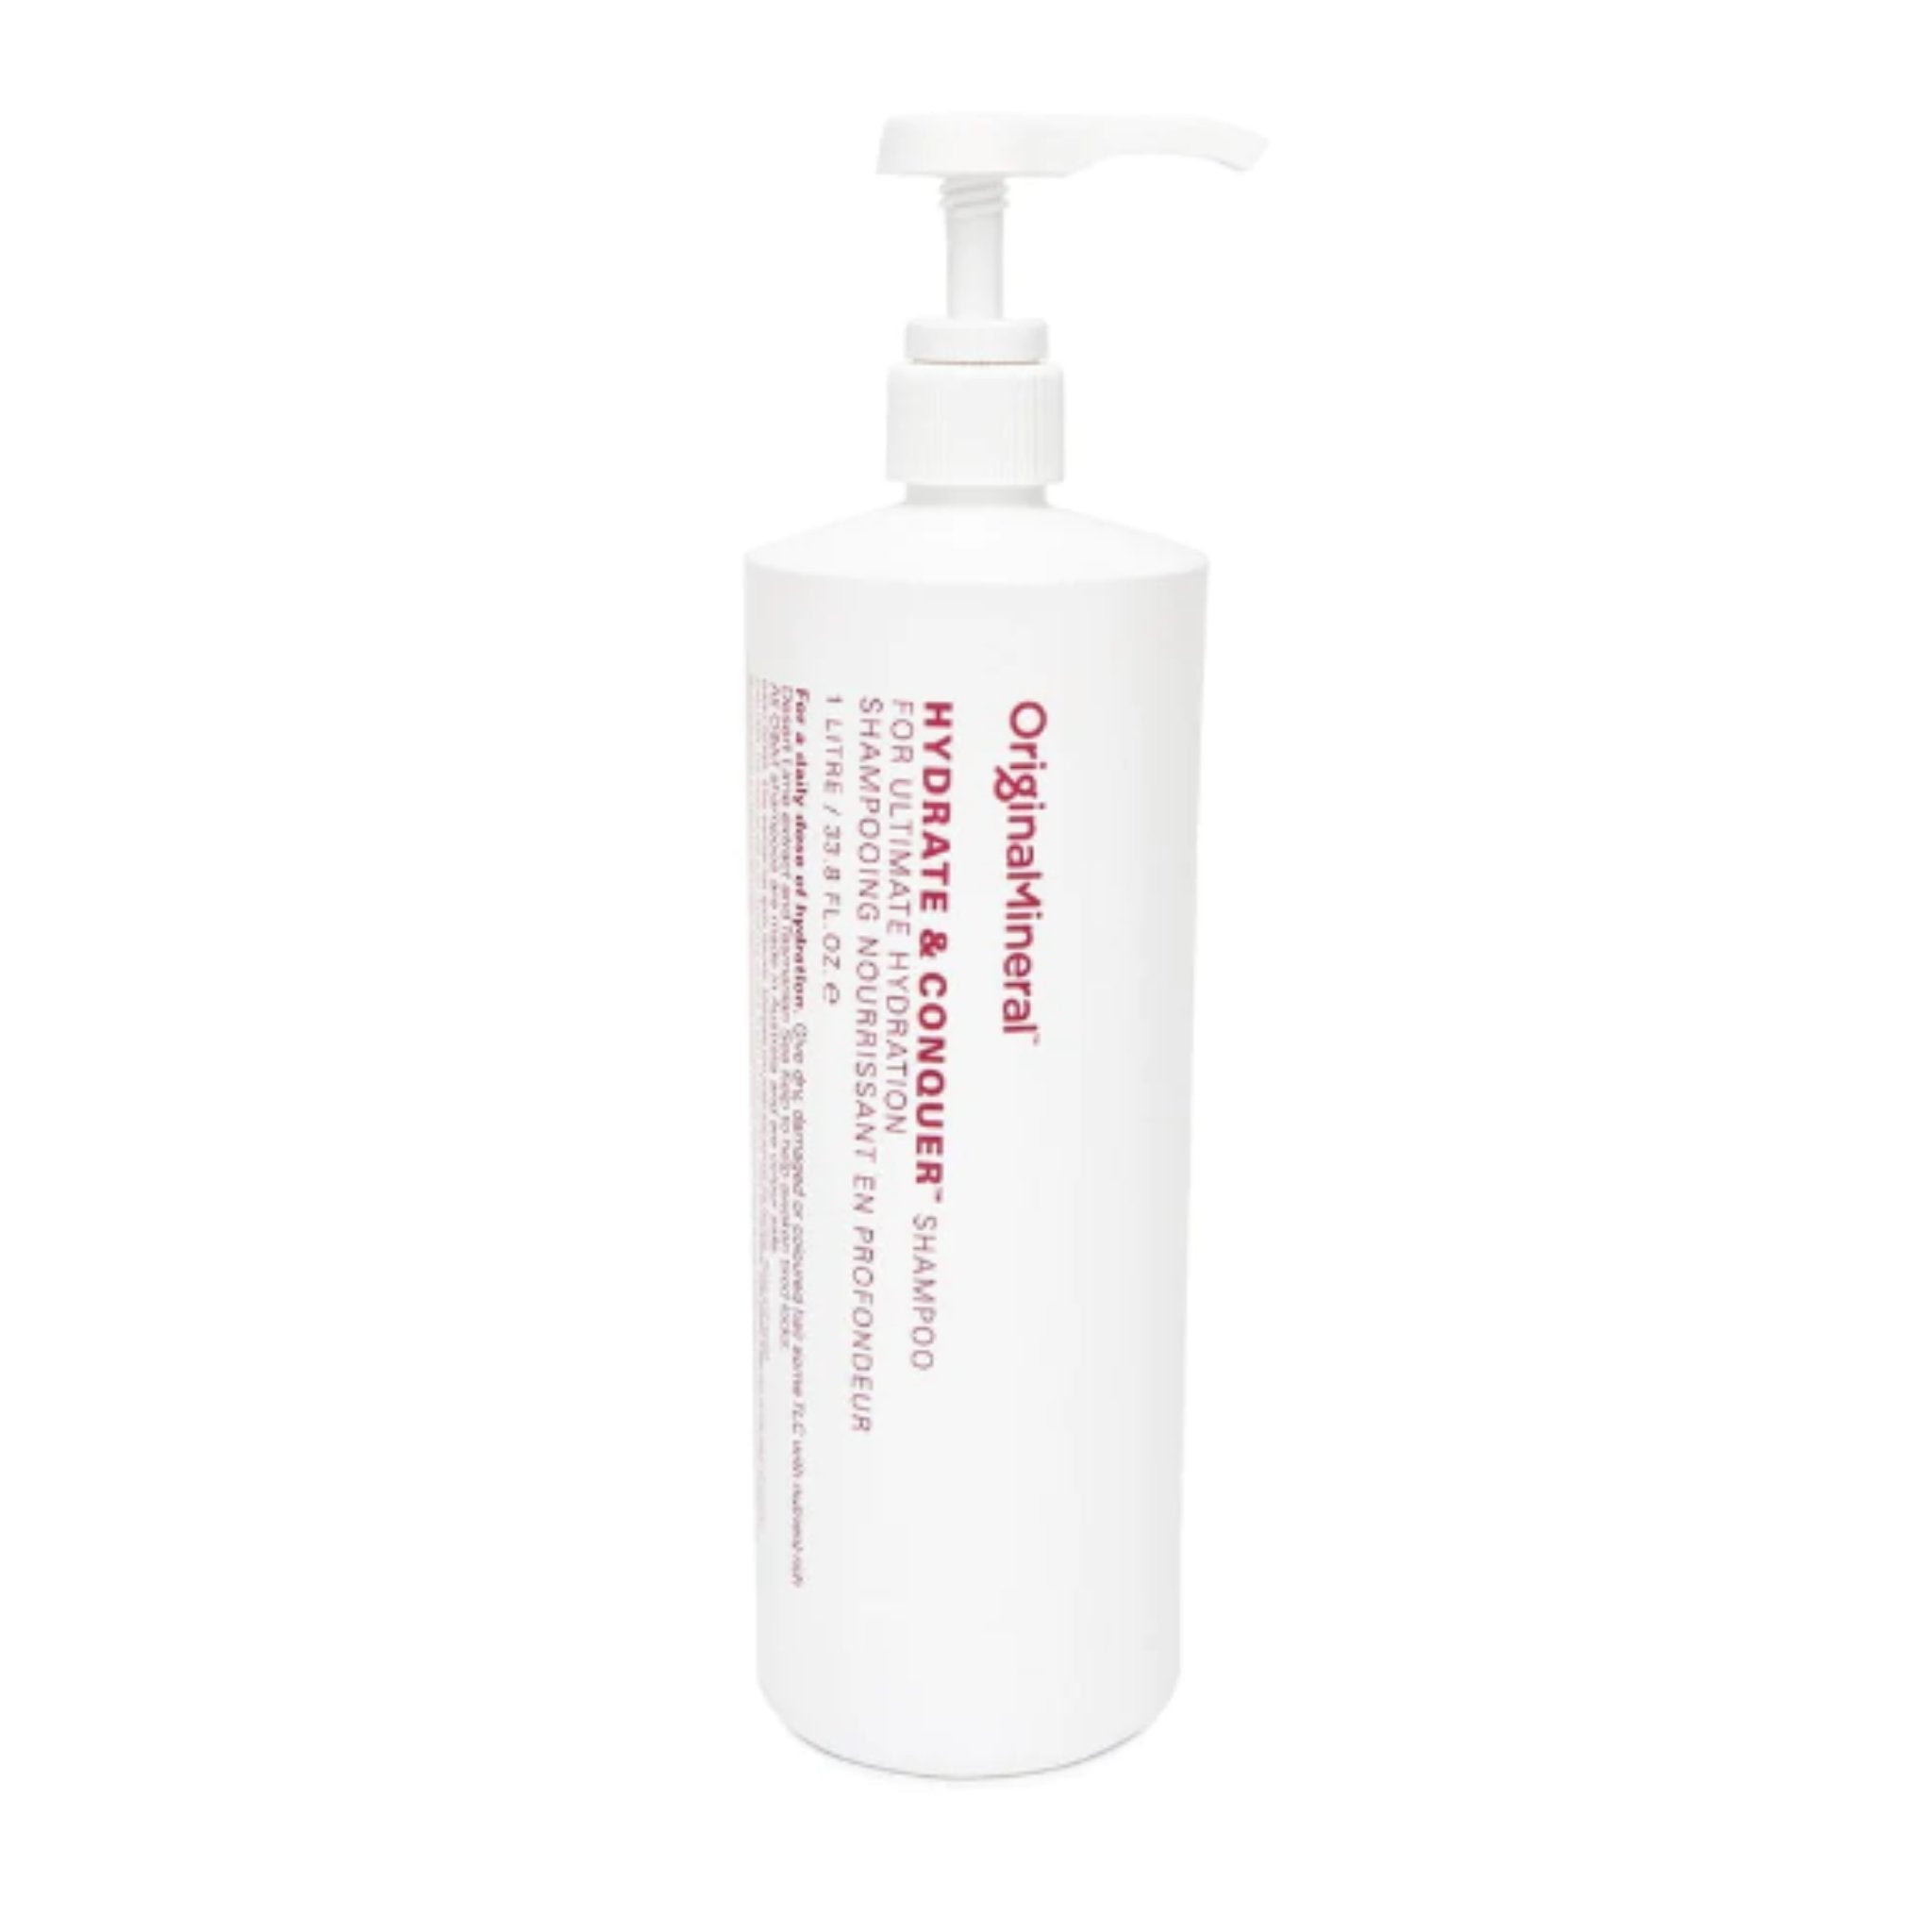 O&M. Revitalisant Hydrate and Conquer - 1000 ml - Concept C. Shop